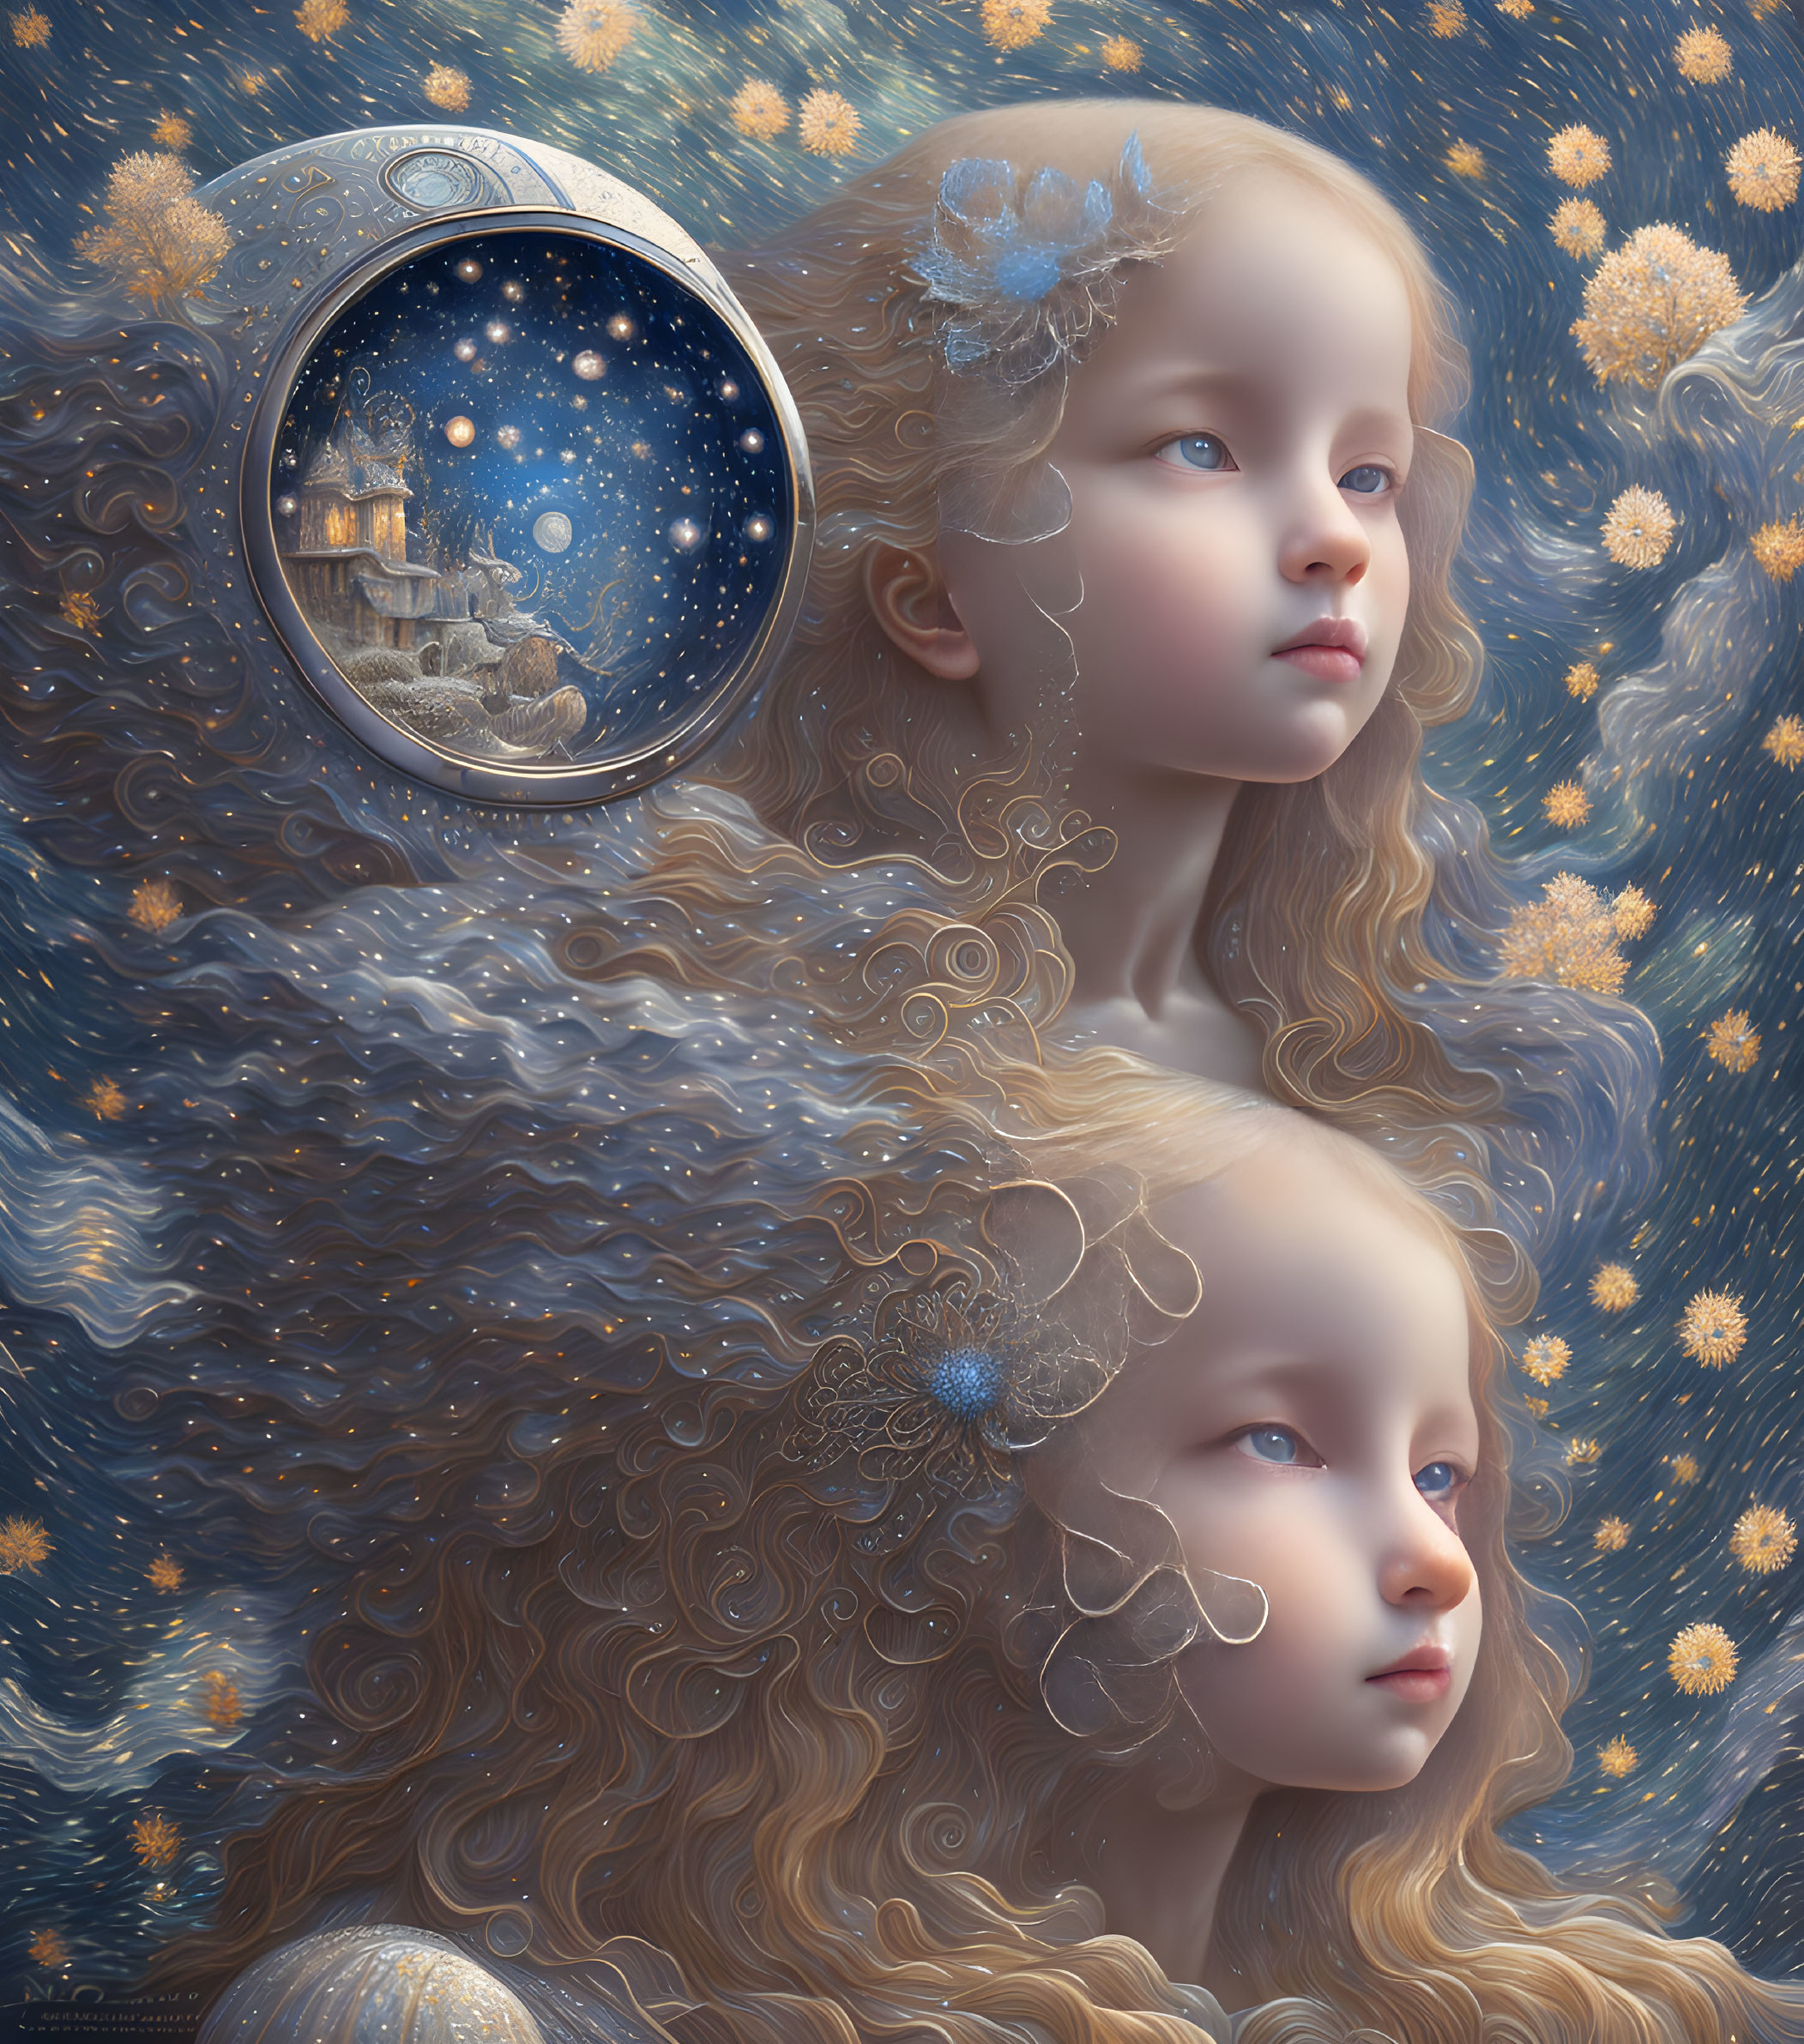 Starry Serenity: Celestial Faces in Harmony